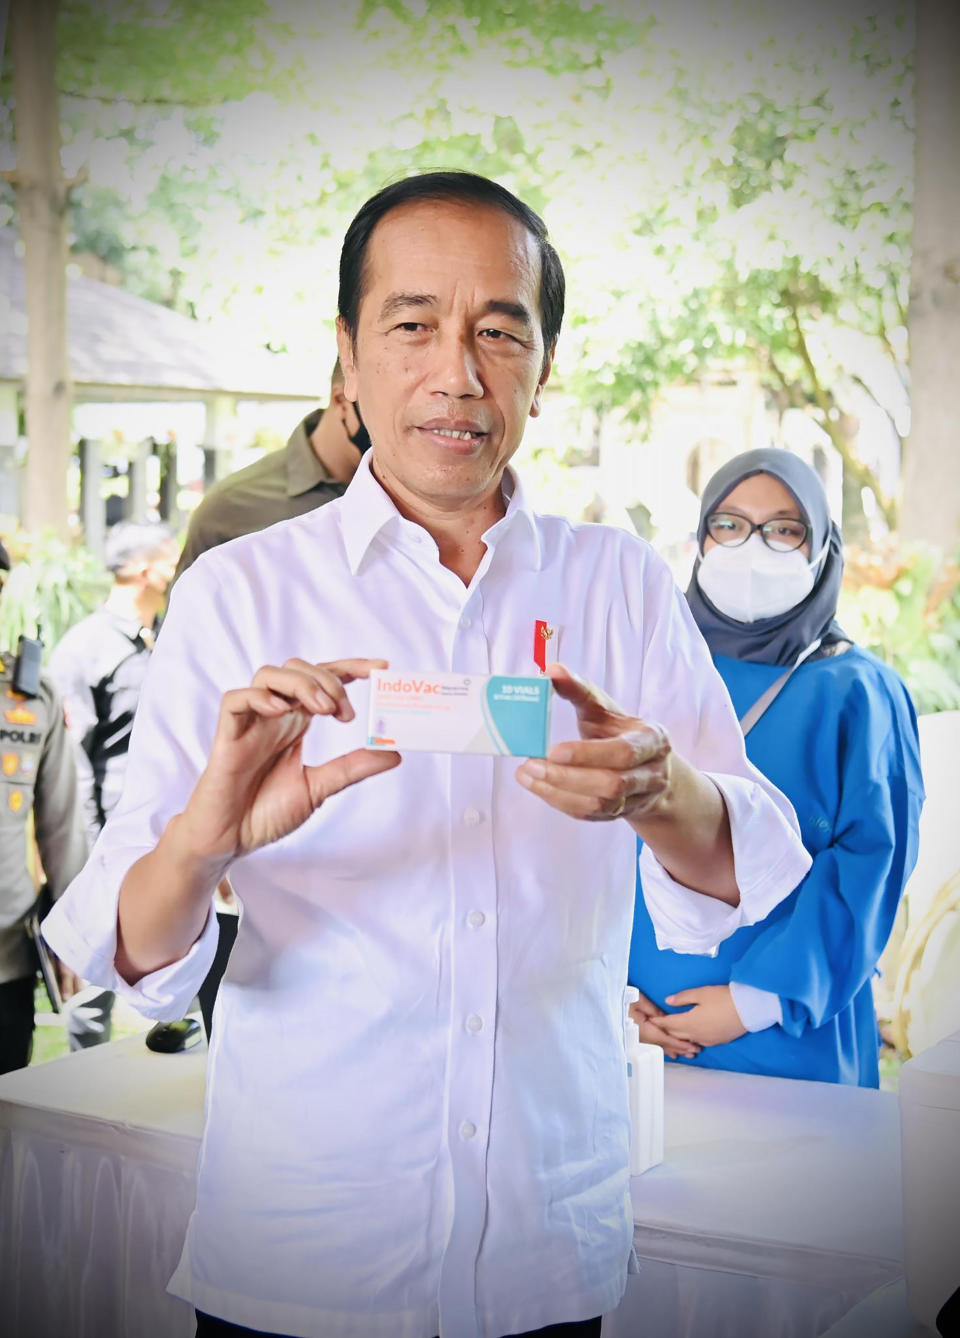 In this photo released by the Press and Media Bureau of the Indonesian Presidential Palace, Indonesian President Joko Widodo shows a box of IndoVac COVID-19 vaccine during the launch of the country's first home-grown COVID-19 vaccine, IndoVac in Bandung, West Java , Indonesia, Thursday, Oct 13, 2022. Indonesian leader on Thursday launched the country's first home-grown COVID-19 vaccine to help reduce the world's fourth most populous nation's dependency on imported vaccines. (Laily Rachev/Indonesian Presidential Palace via AP)